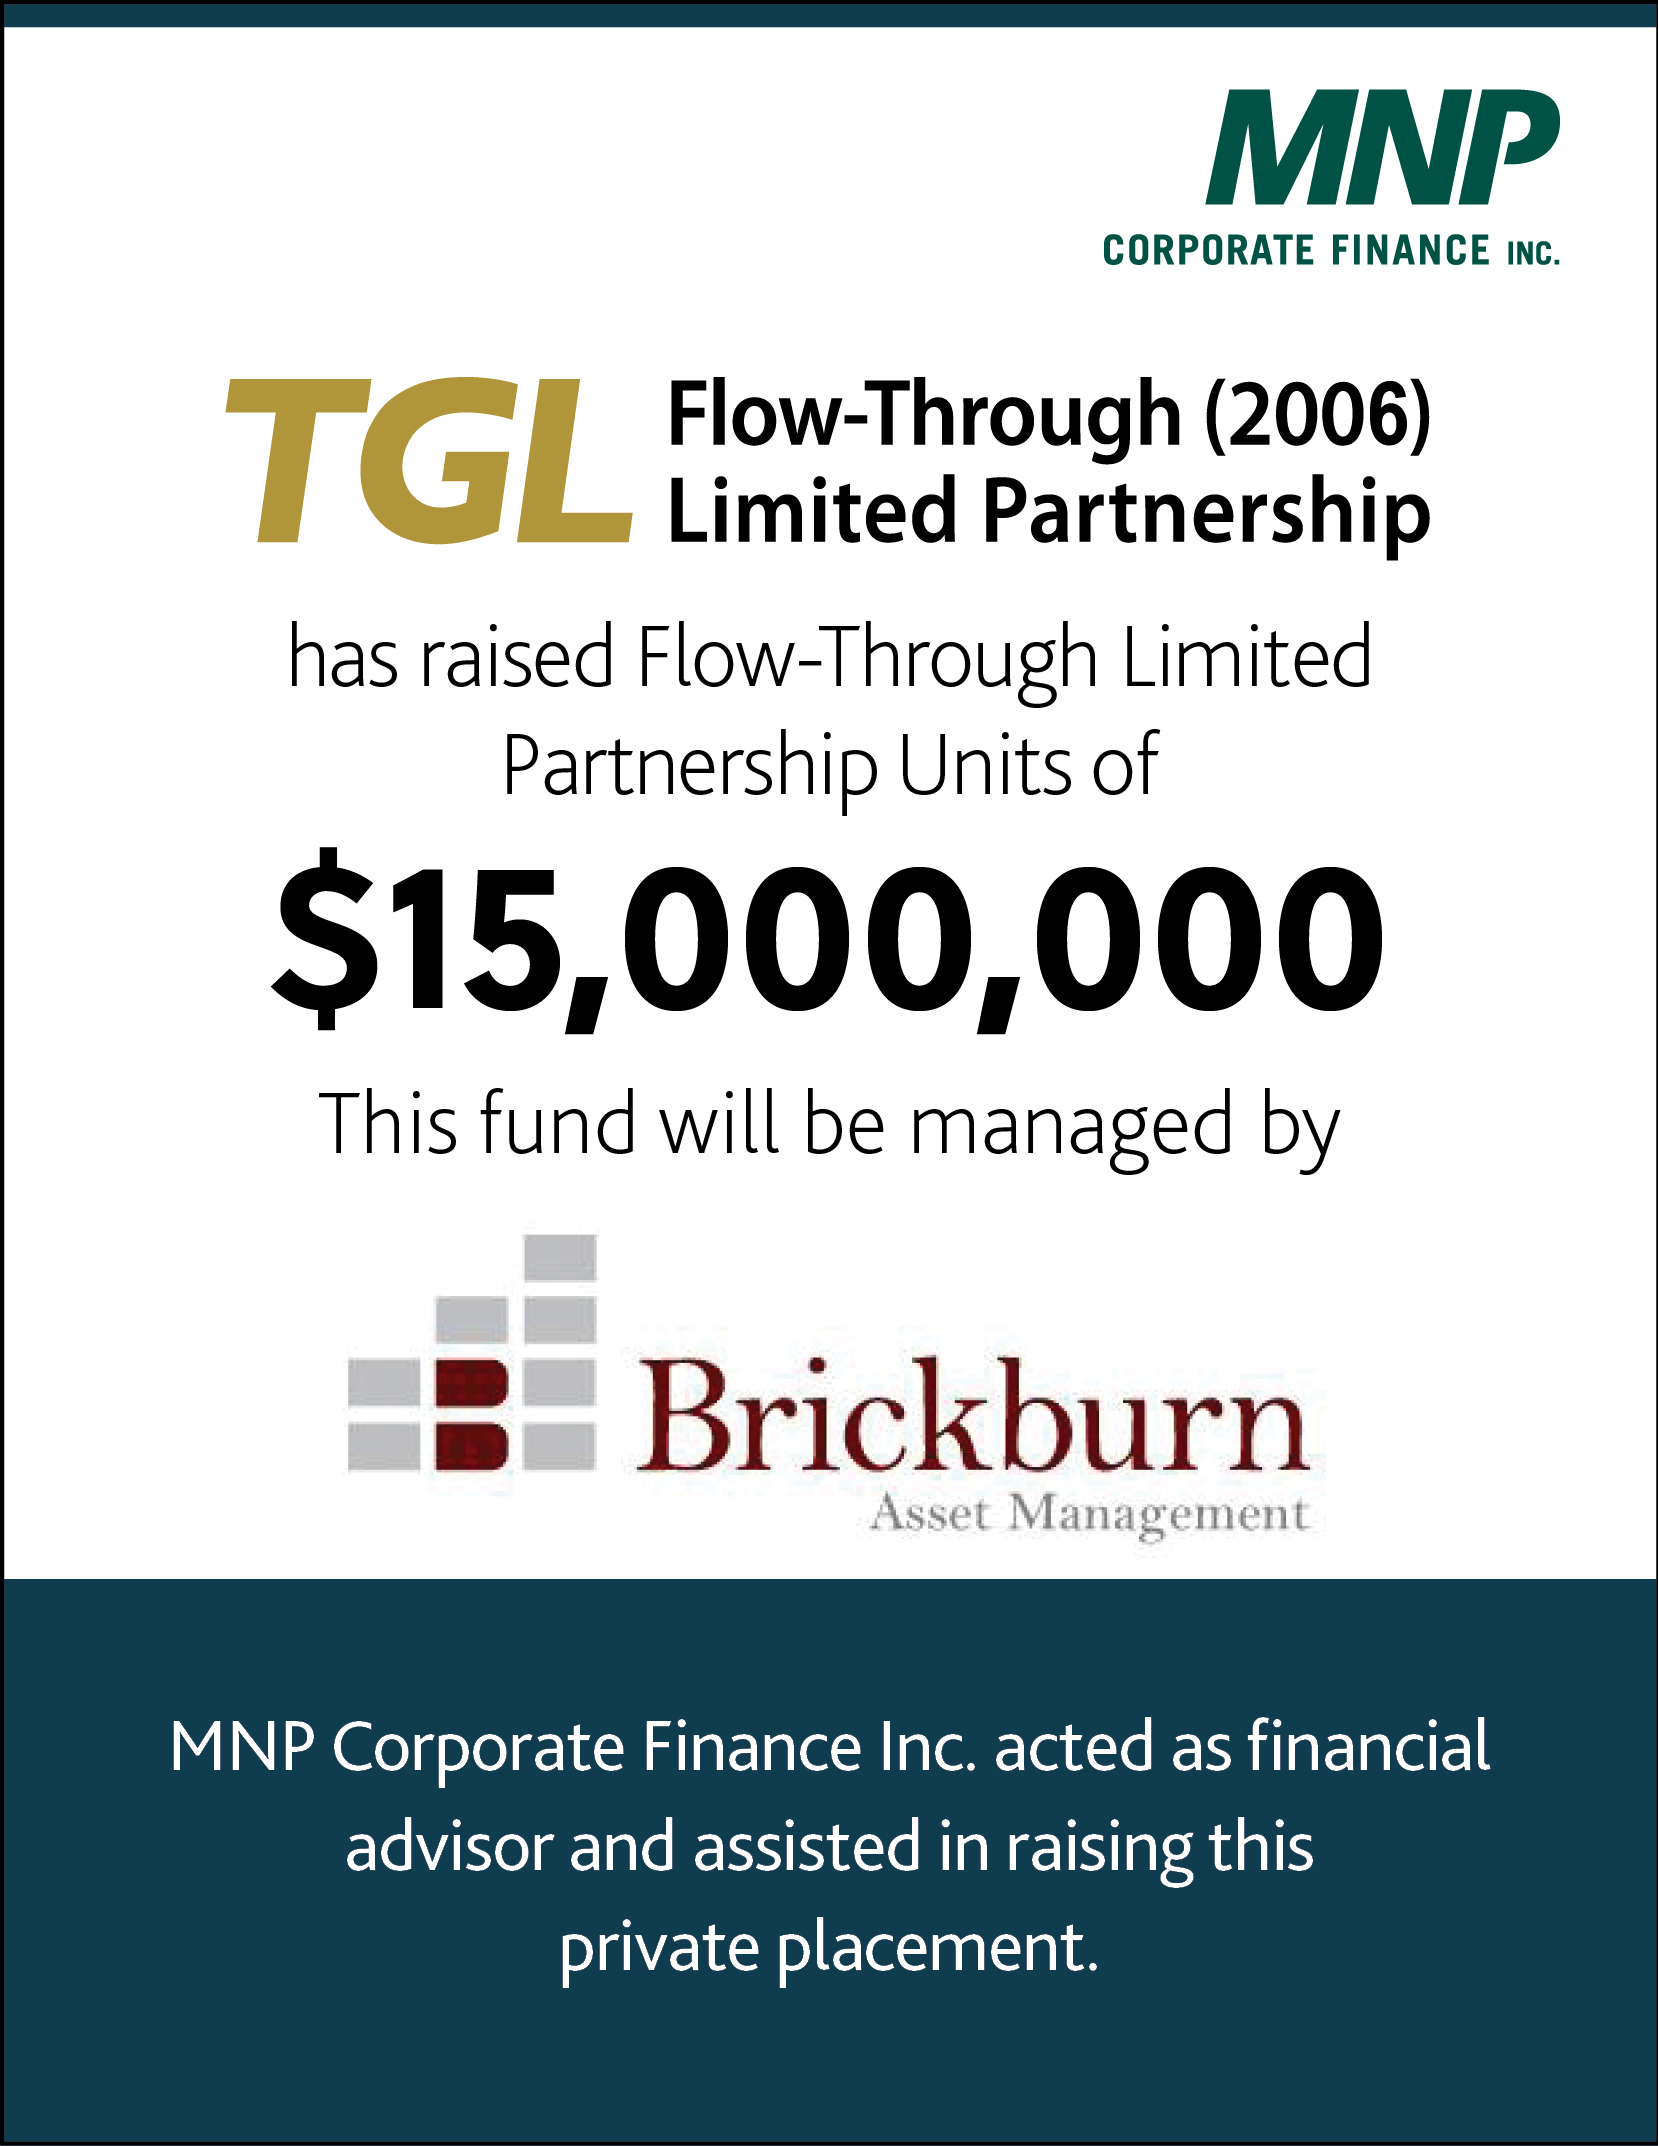 TGL Flow-Through (2006) Limited Partnership has raised Flow-Through Limited Partnership Units of $15,000,000 This fund will be managed by Brickburn Asset Management 